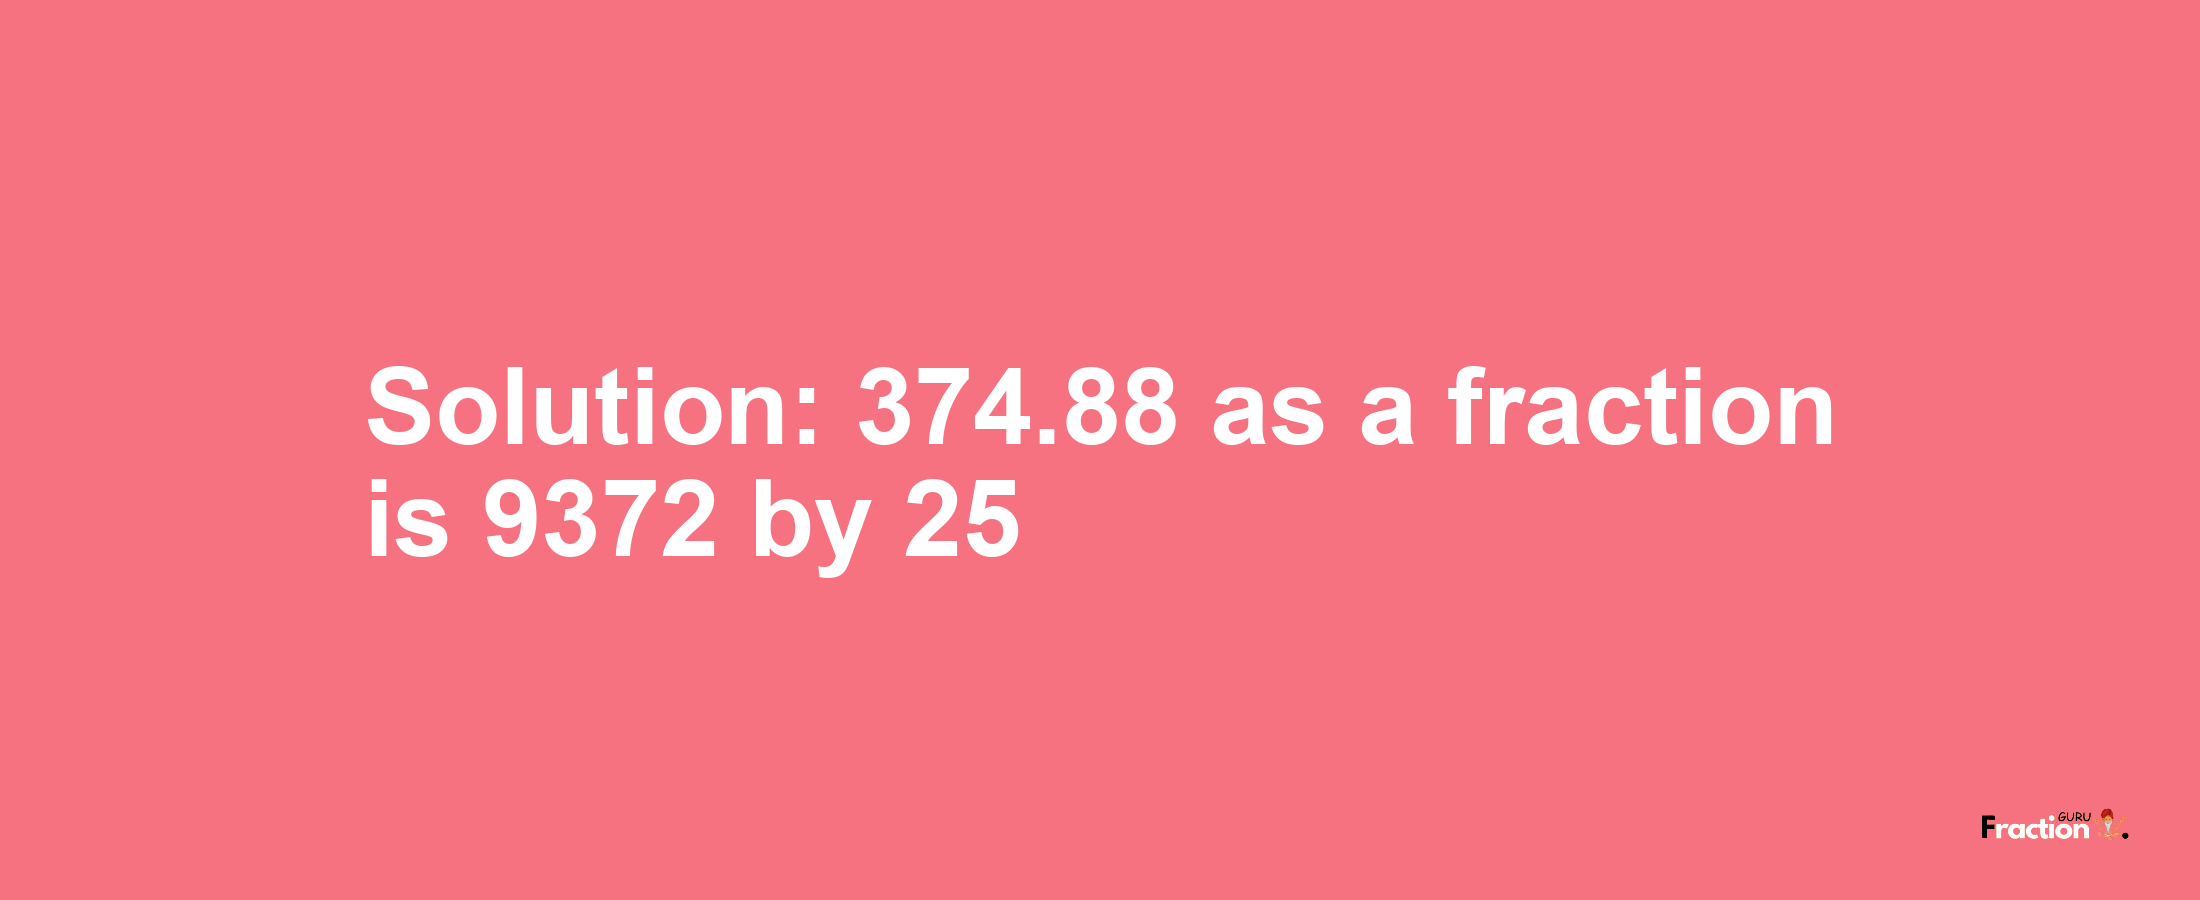 Solution:374.88 as a fraction is 9372/25